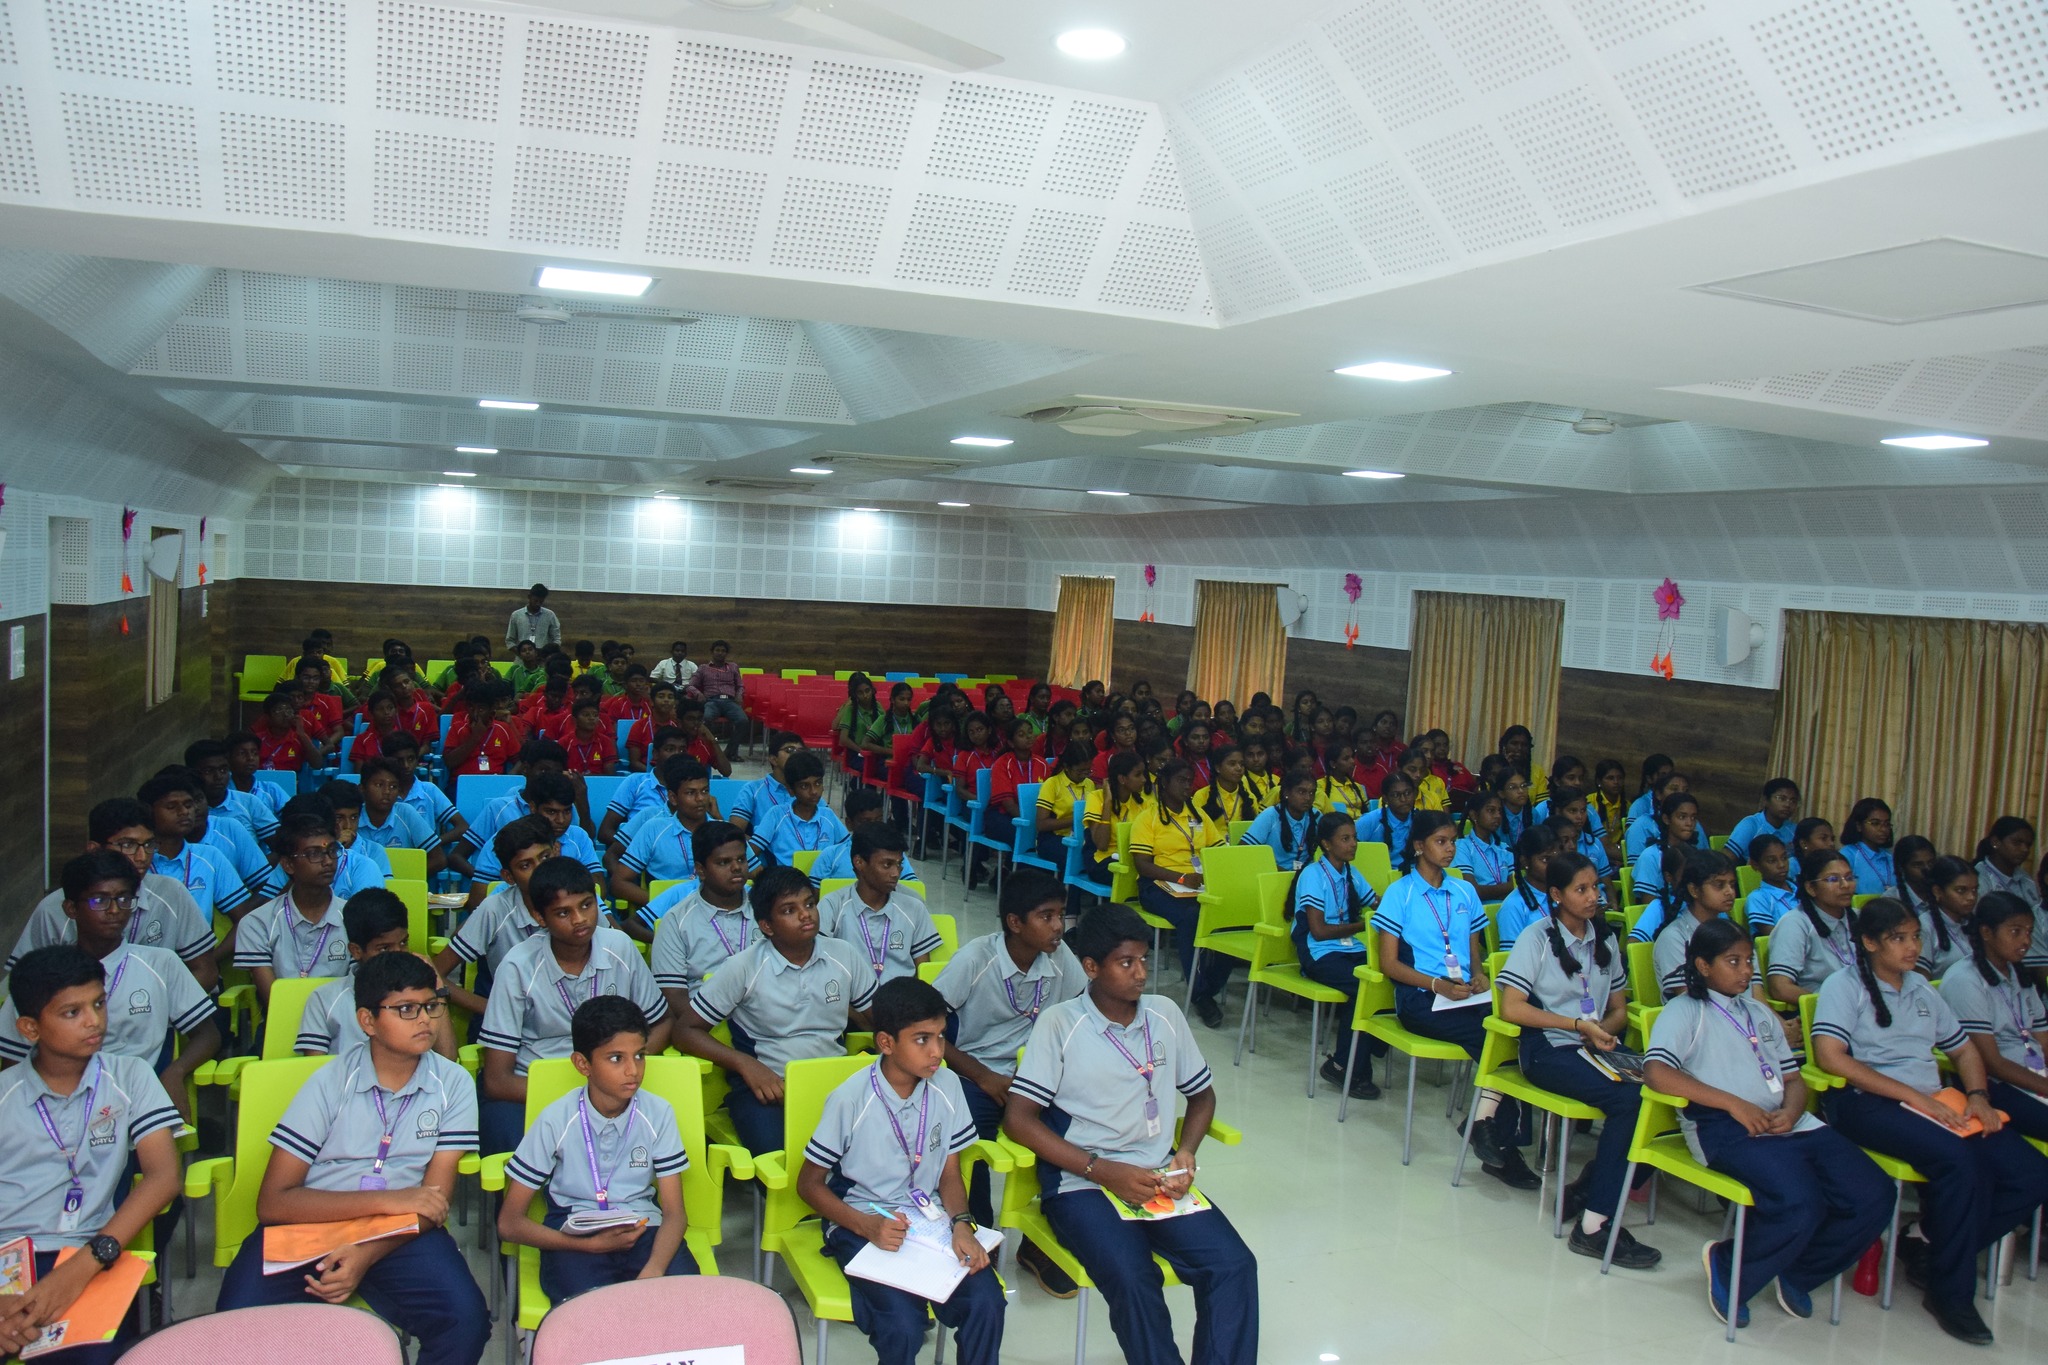 Sessions for students and Parents @ Santhanam group of Institutes..  " "Take charge of your Life" ... well received Sessions!!!!